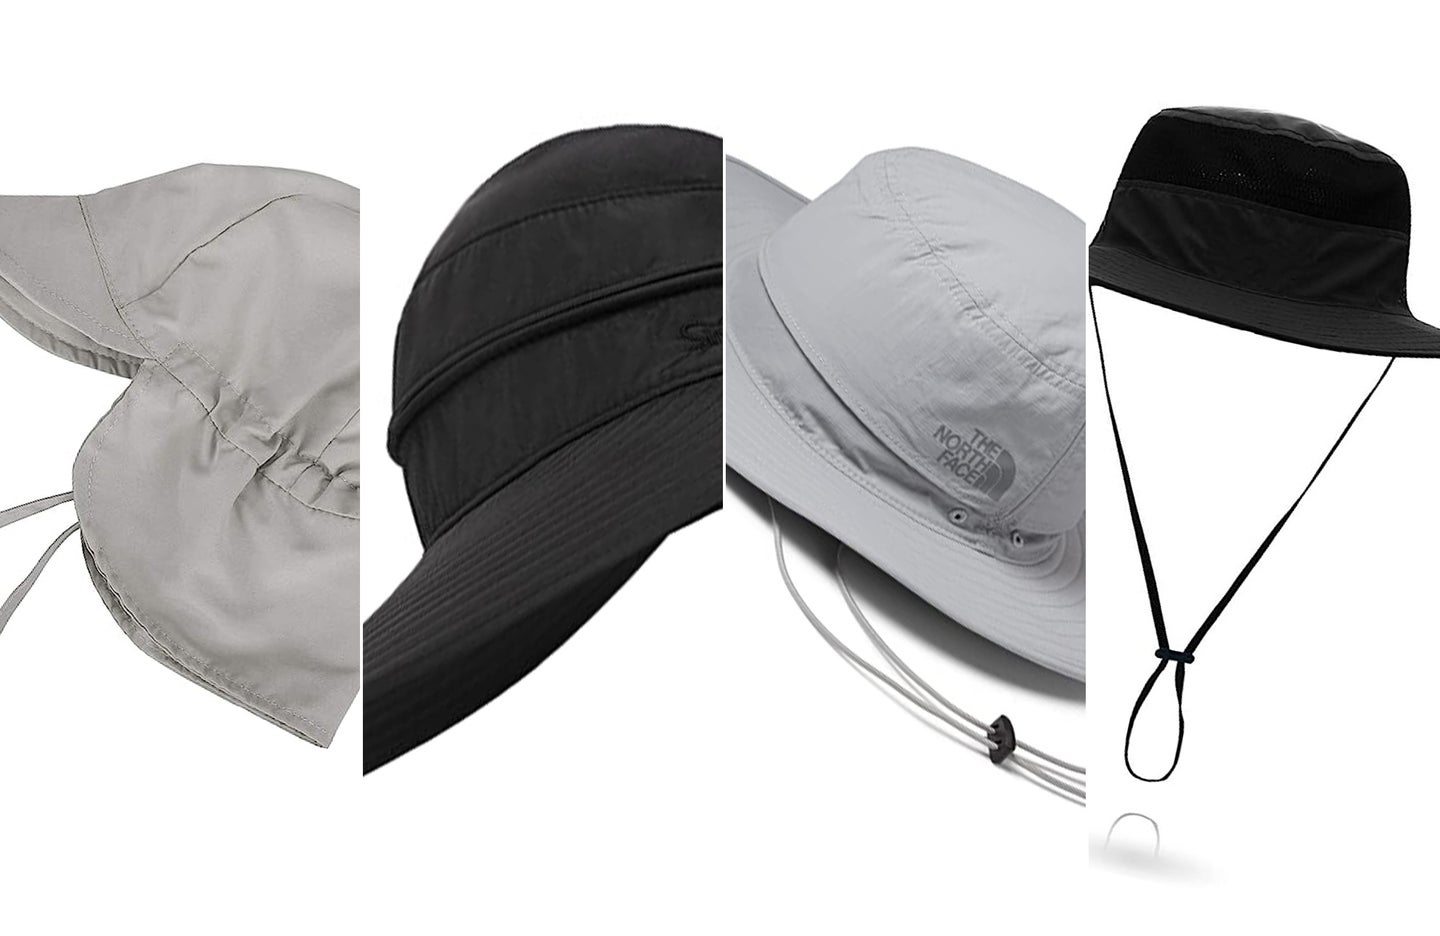 The best sun hats composited